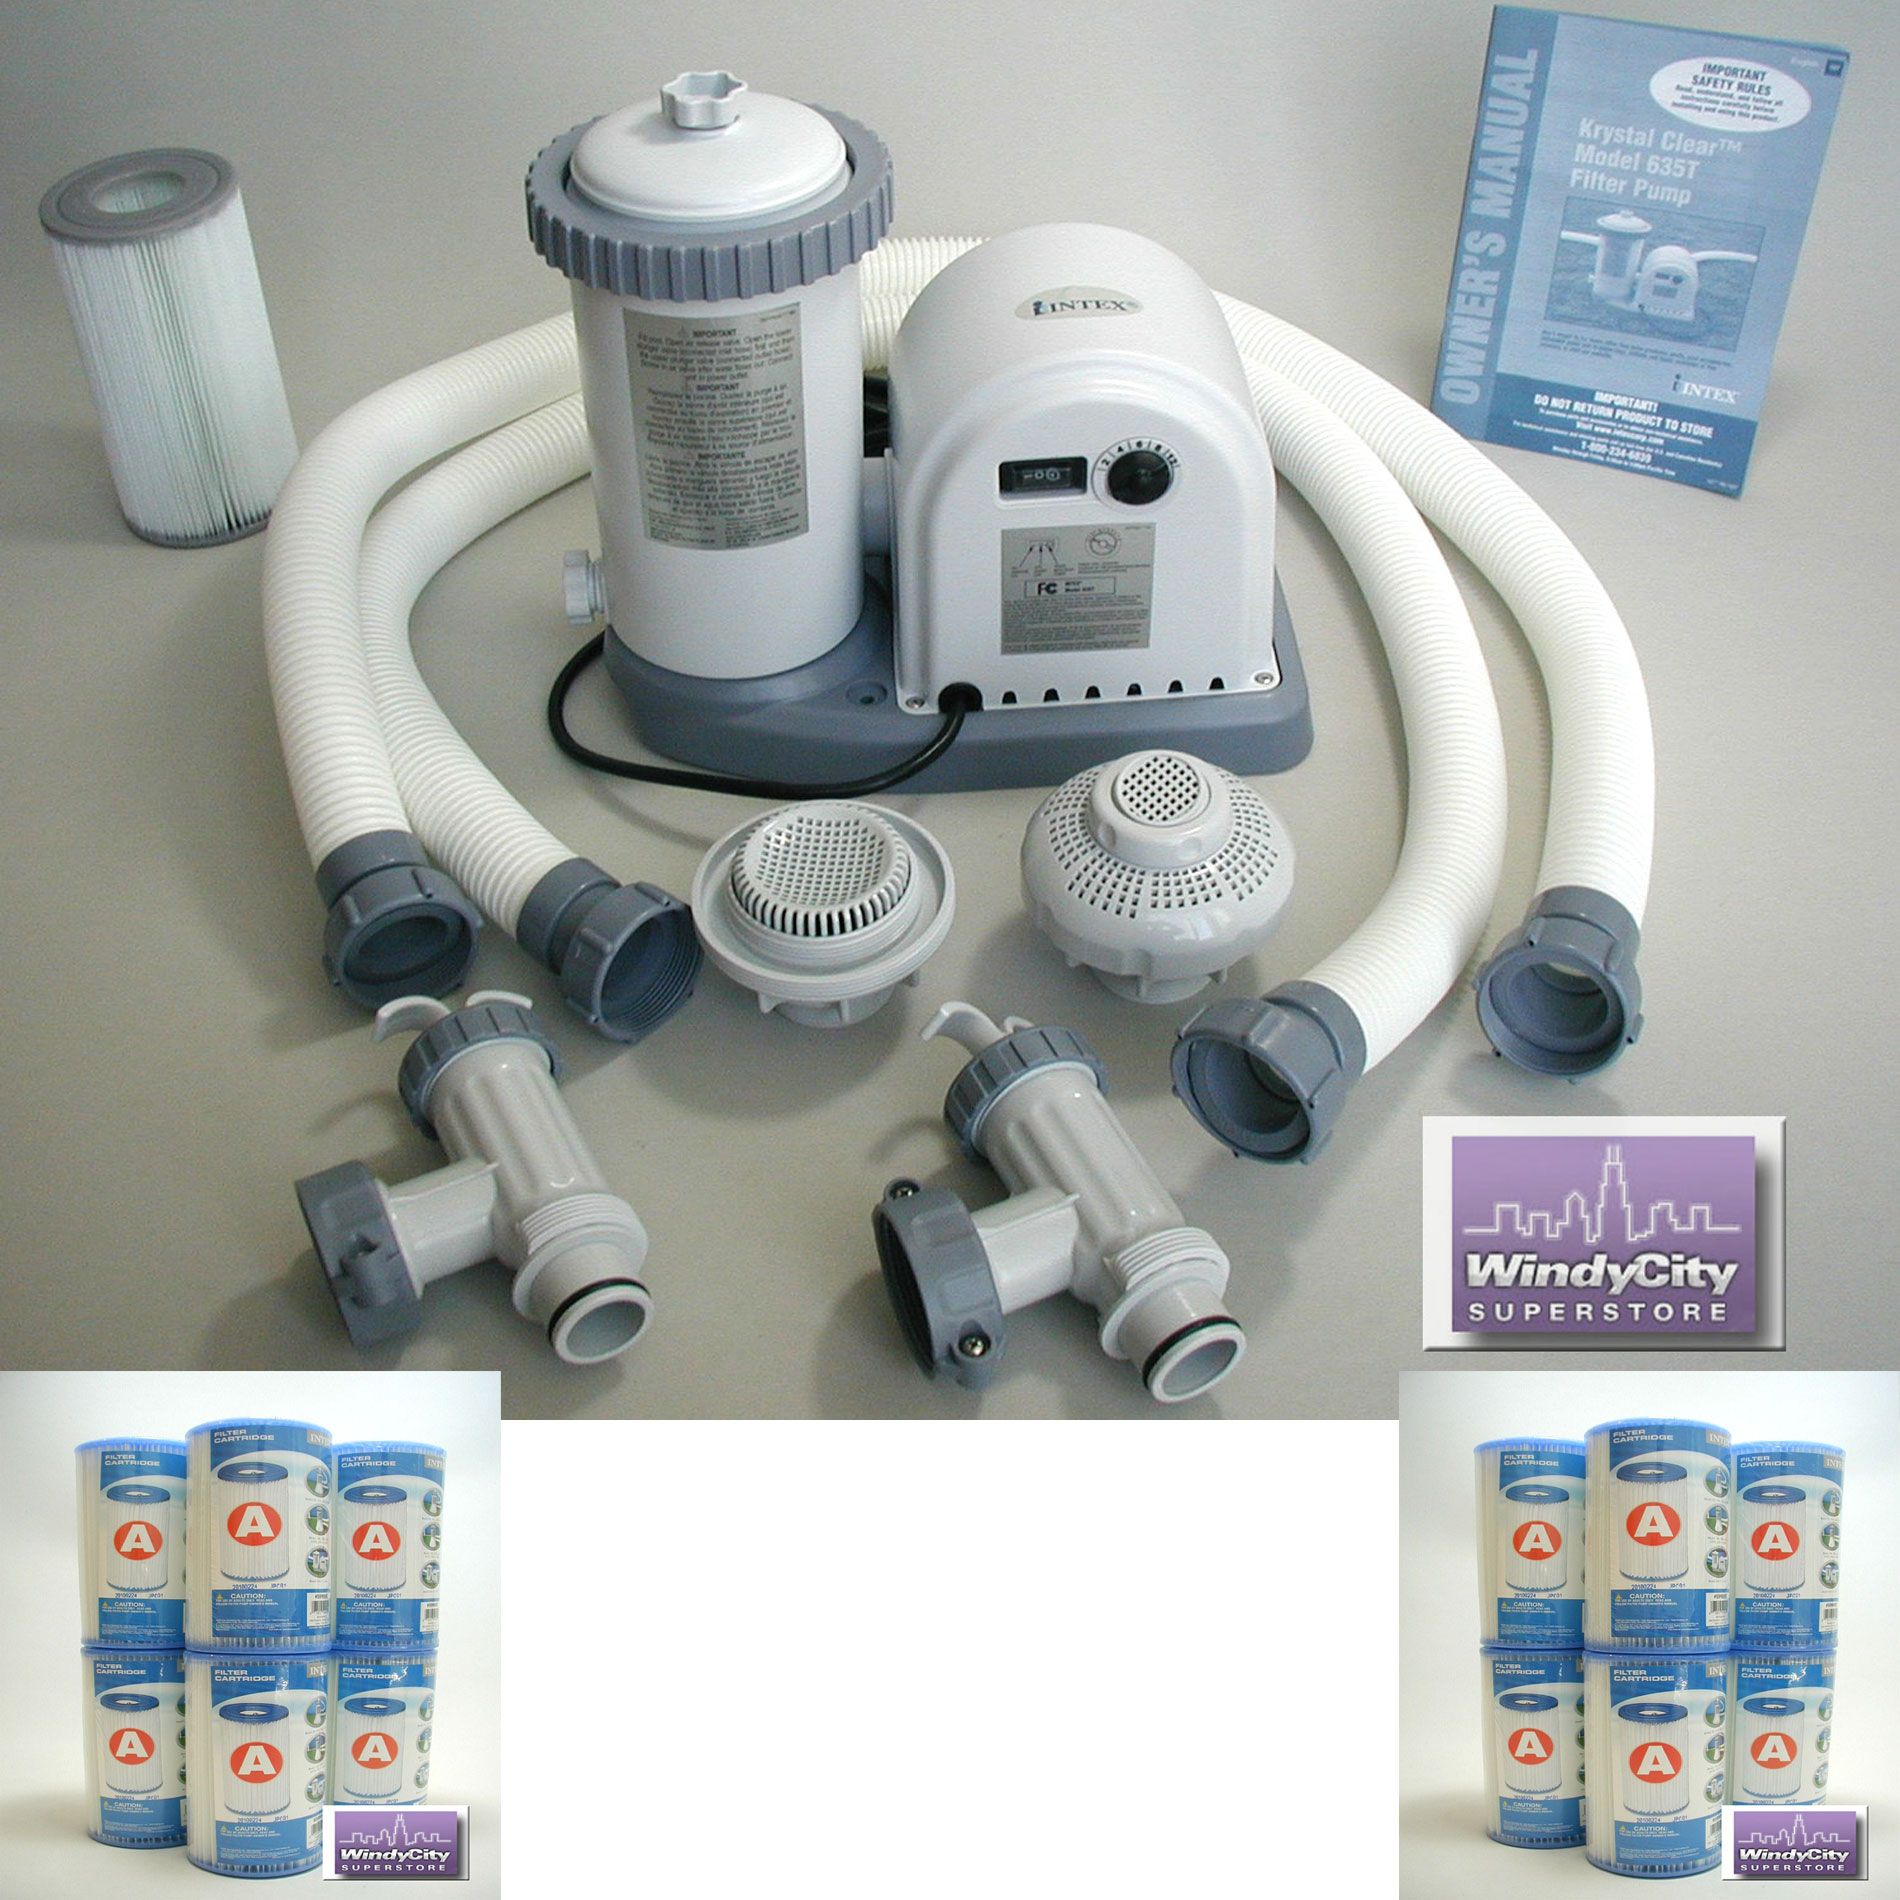  Filter Pump Model 635 with Auto Timer + 12 Type A Filter Cartridges